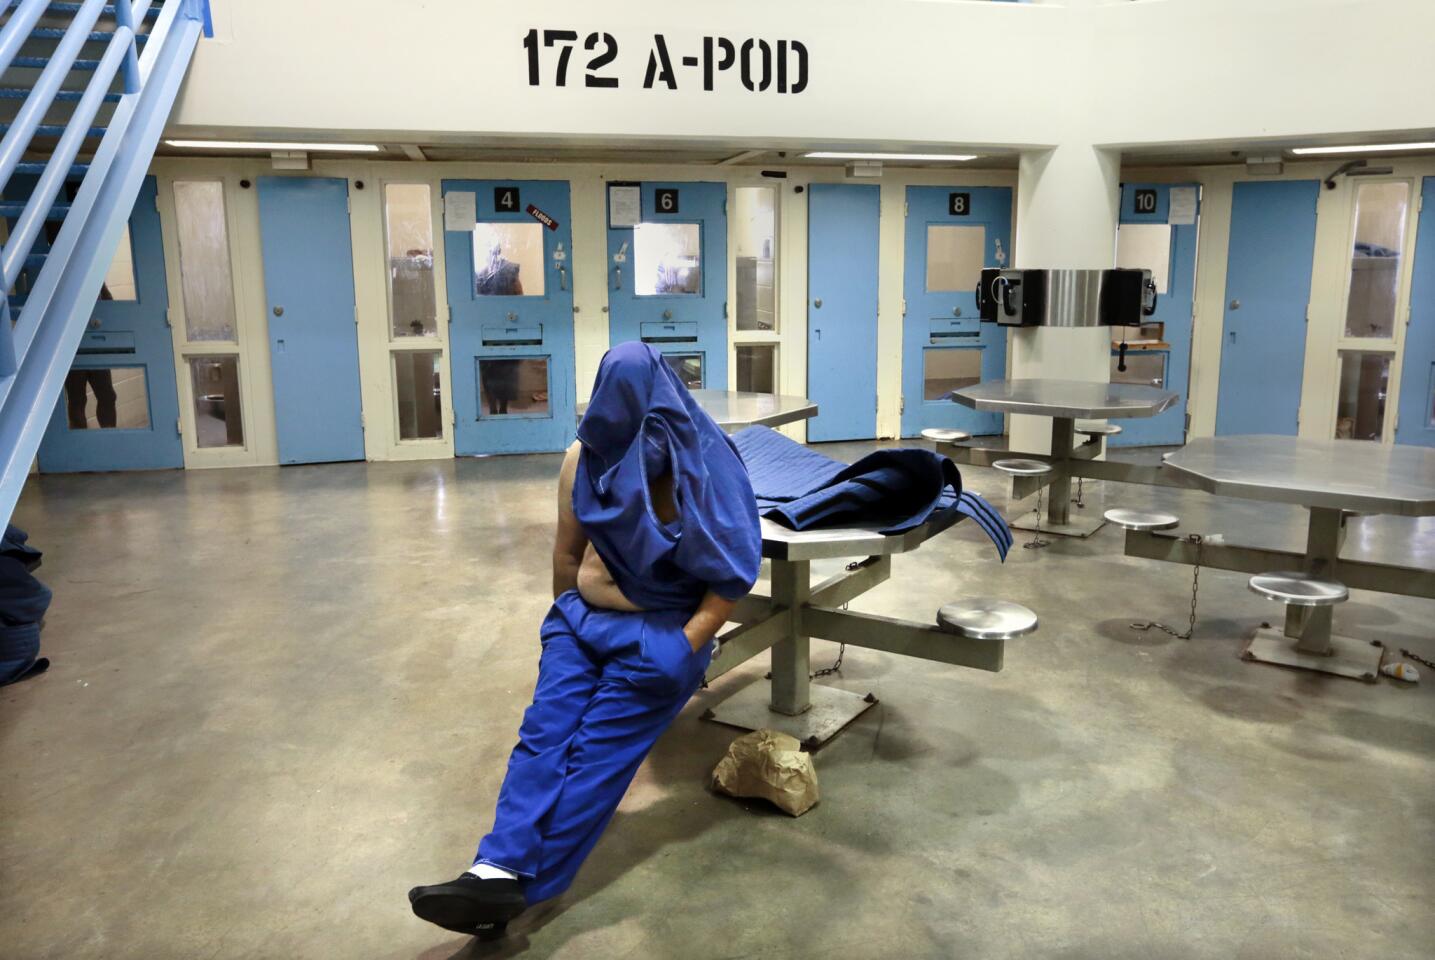 An inmate in the High Observation Mental Health Housing unit covers his face while the media tour the Twin Towers Correctional Facility. Some inmates who are at high risk for suicide are required to wear a special wrap-around garment (on the table next to the inmate) in the facility.